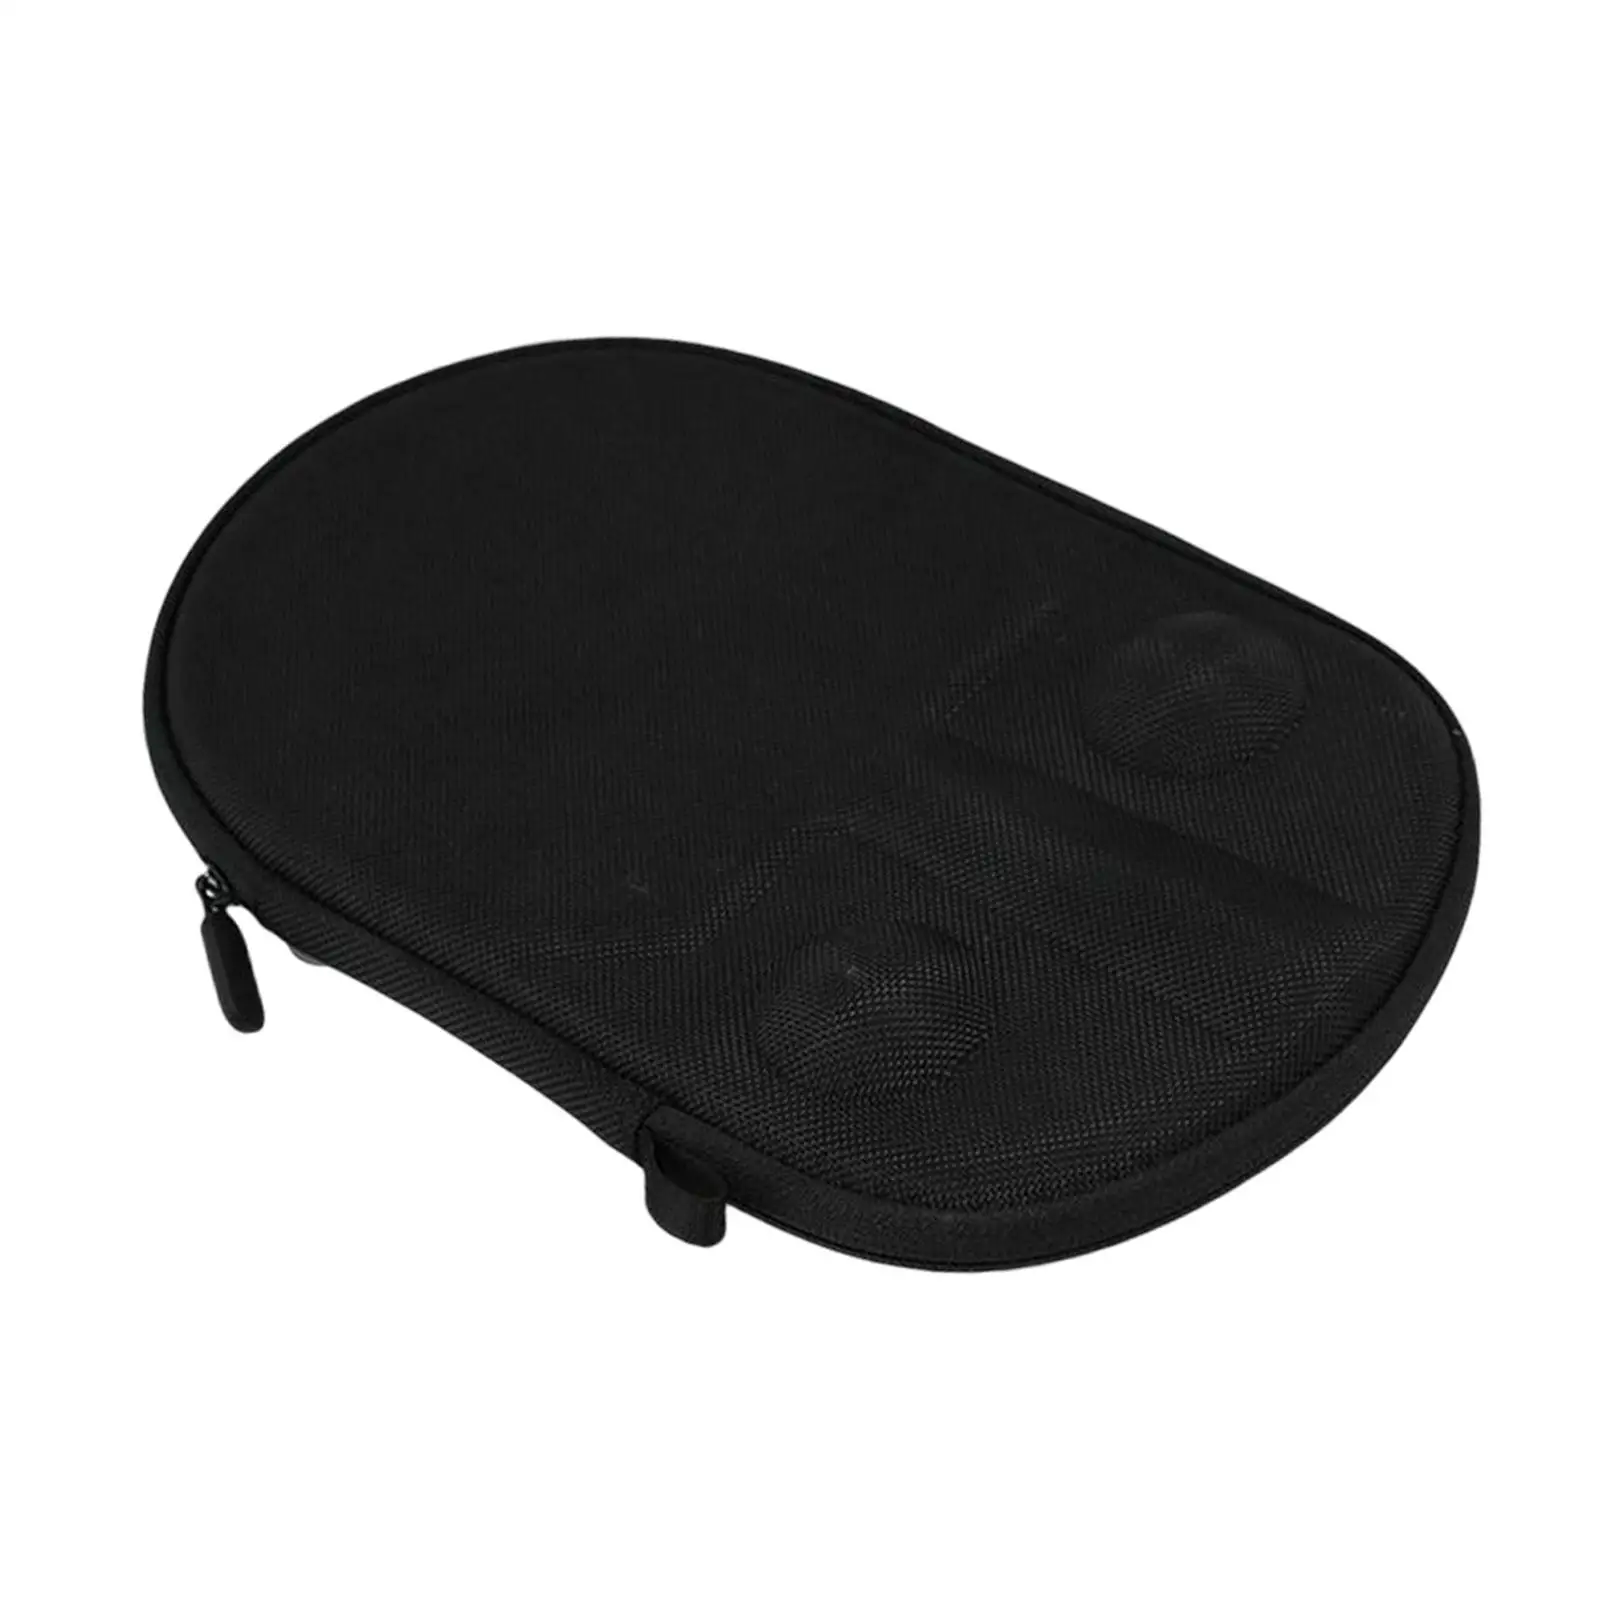 Professional Table Tennis Racket Bag Pong Paddle Bag Storage Case Table Tennis Protector Wear Resistant Sturdy for Outdoor